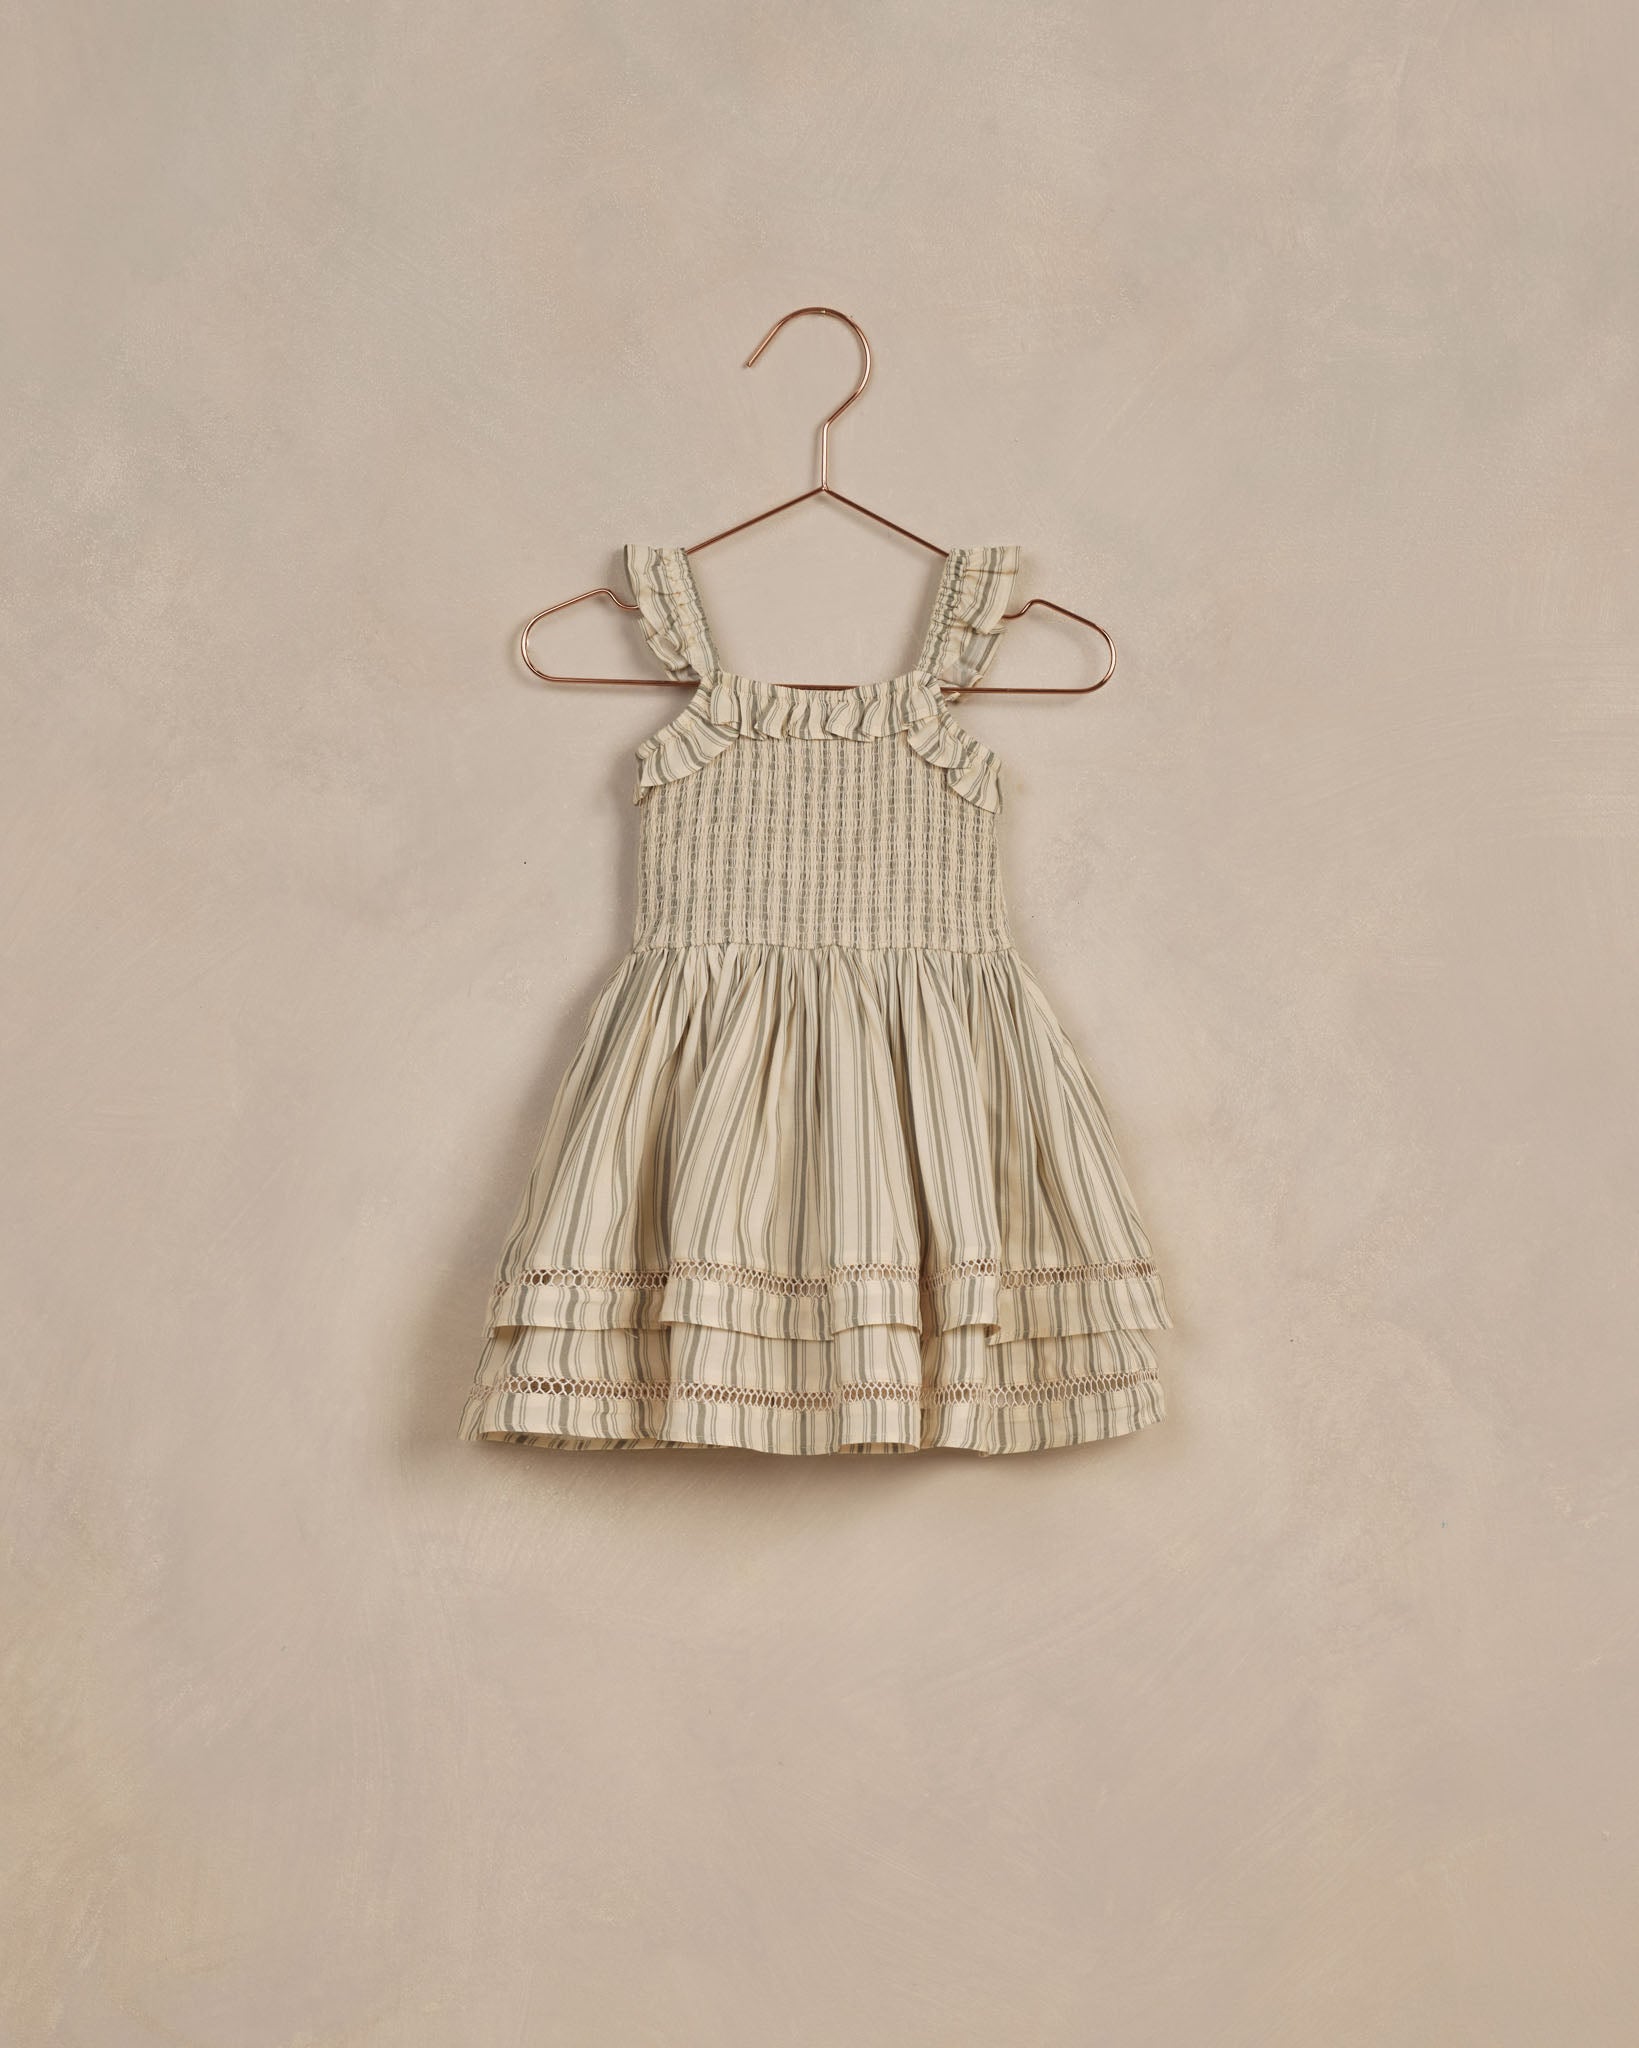 Birdie Dress || Cypress Stripe - Rylee + Cru | Kids Clothes | Trendy Baby Clothes | Modern Infant Outfits |